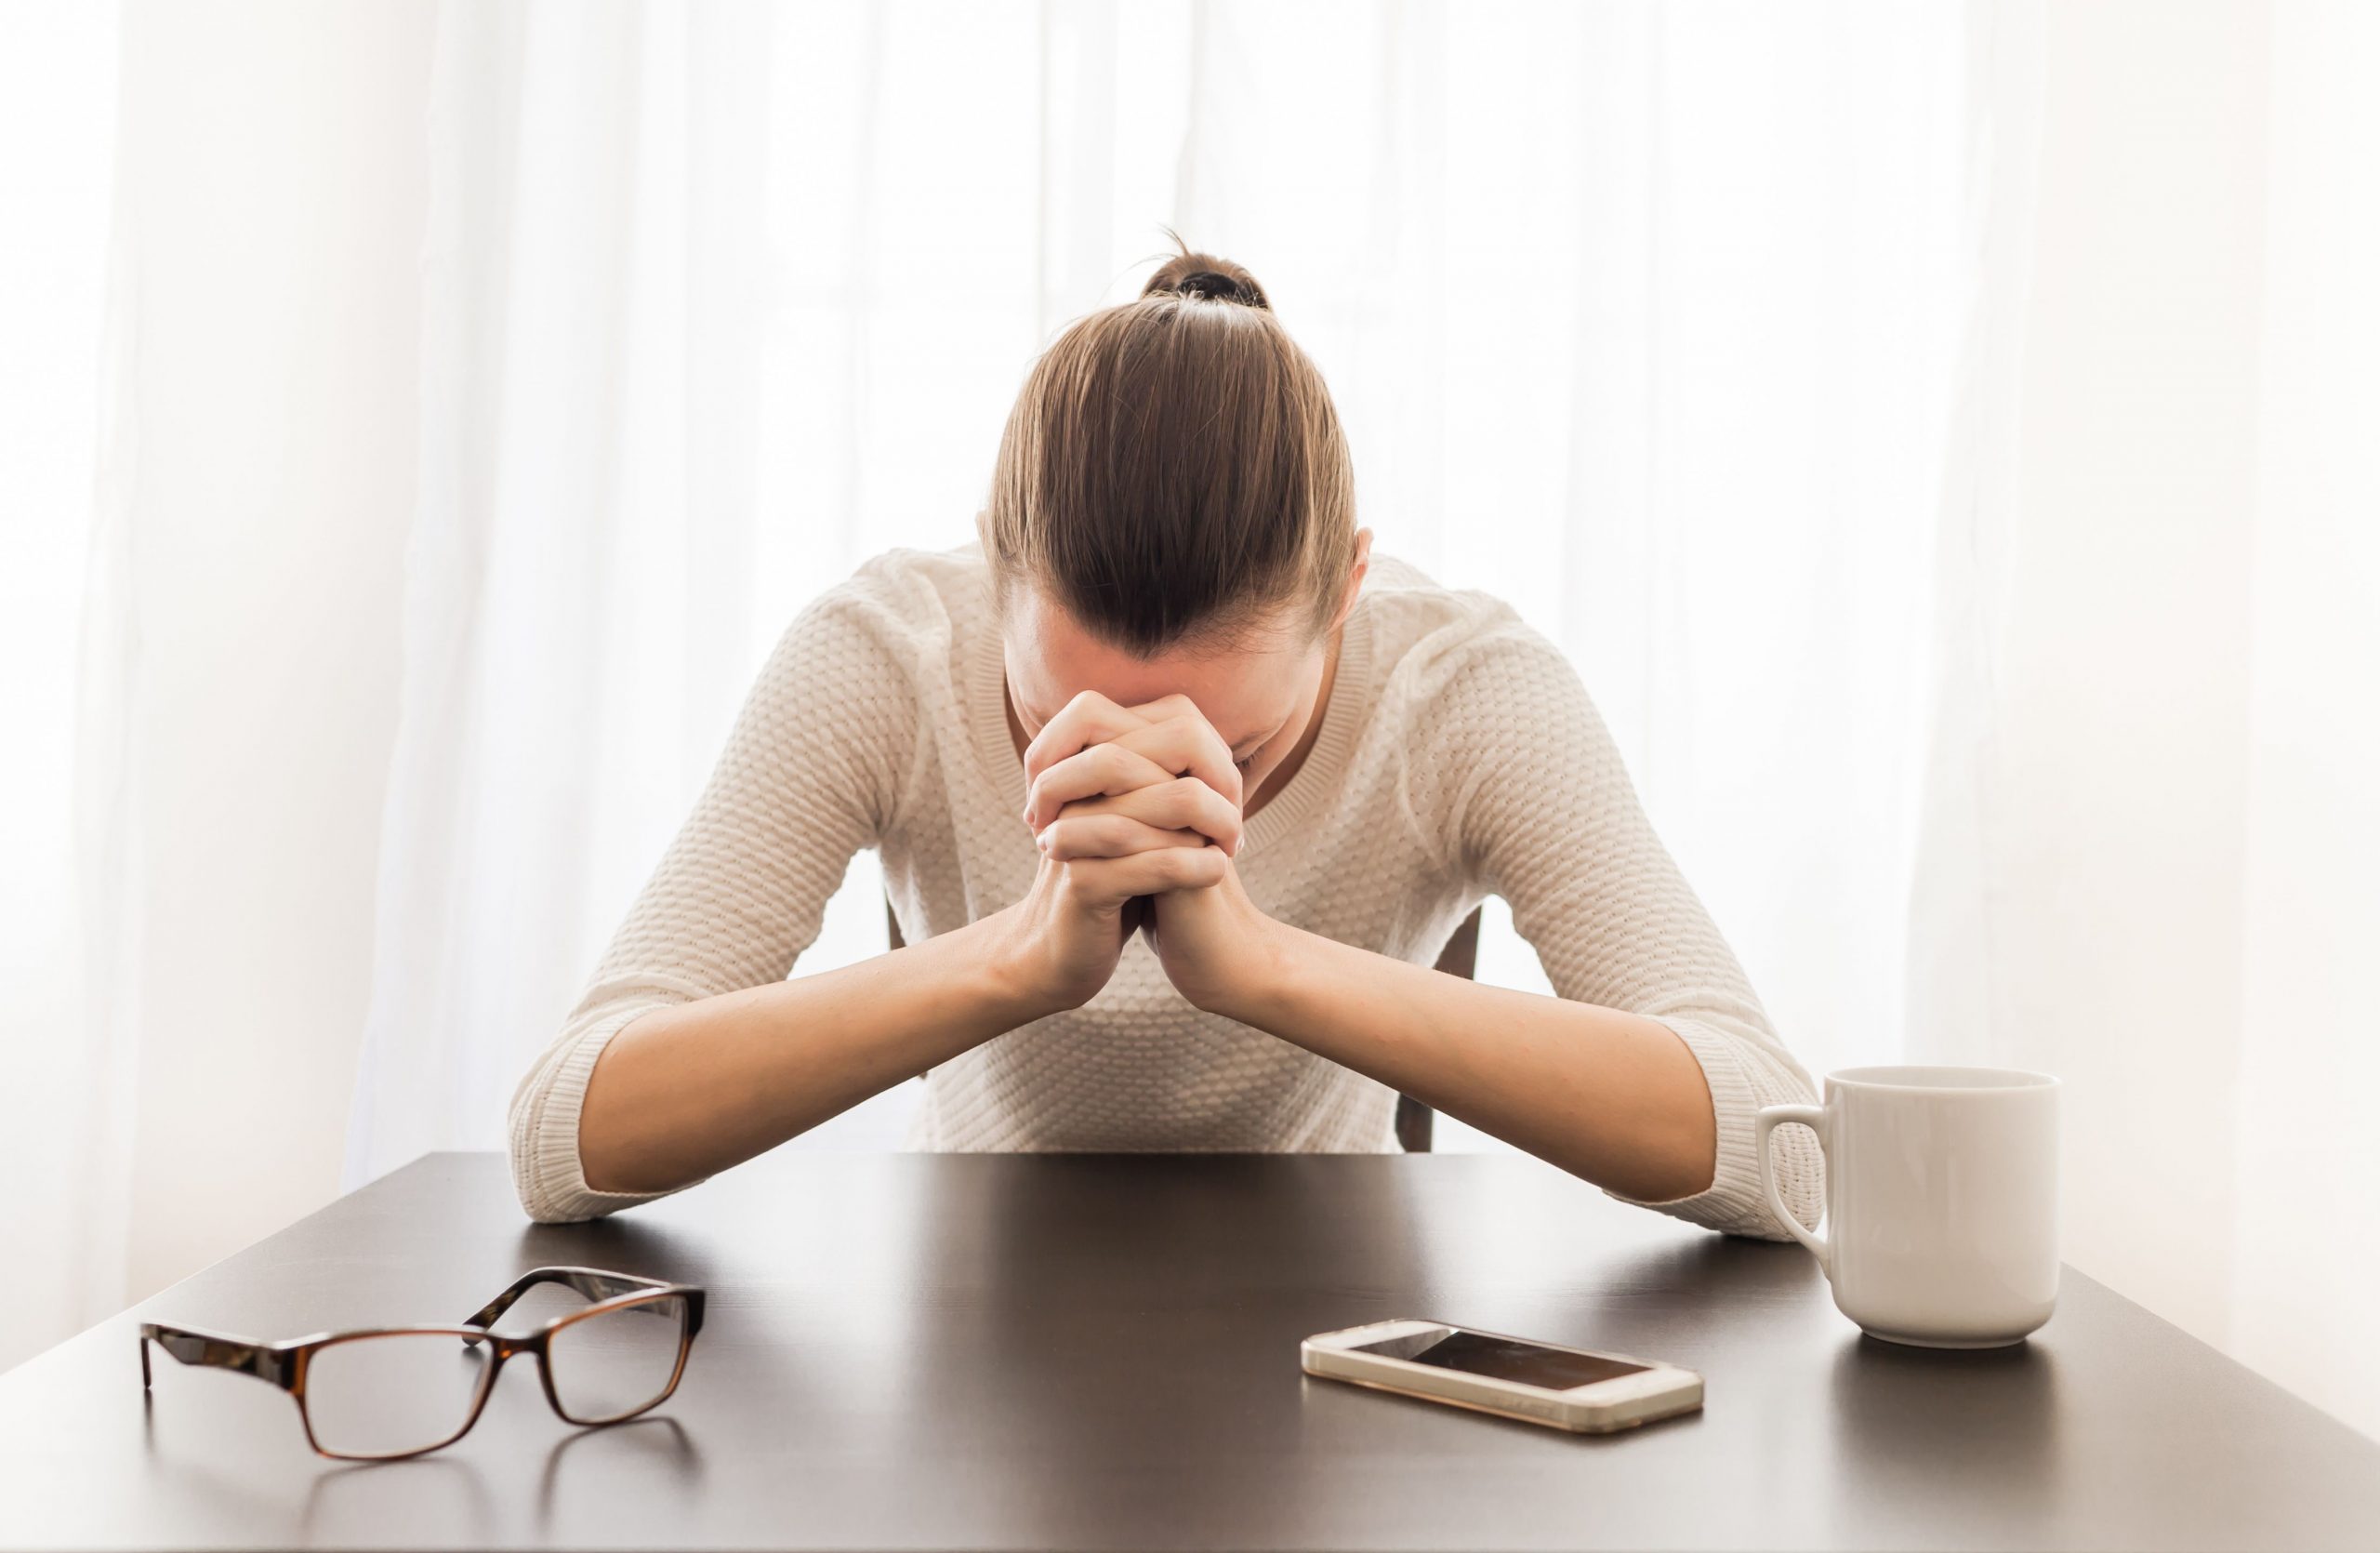 Wellbeing at Work: How to Shield Yourself From Stress in Turbulent Times